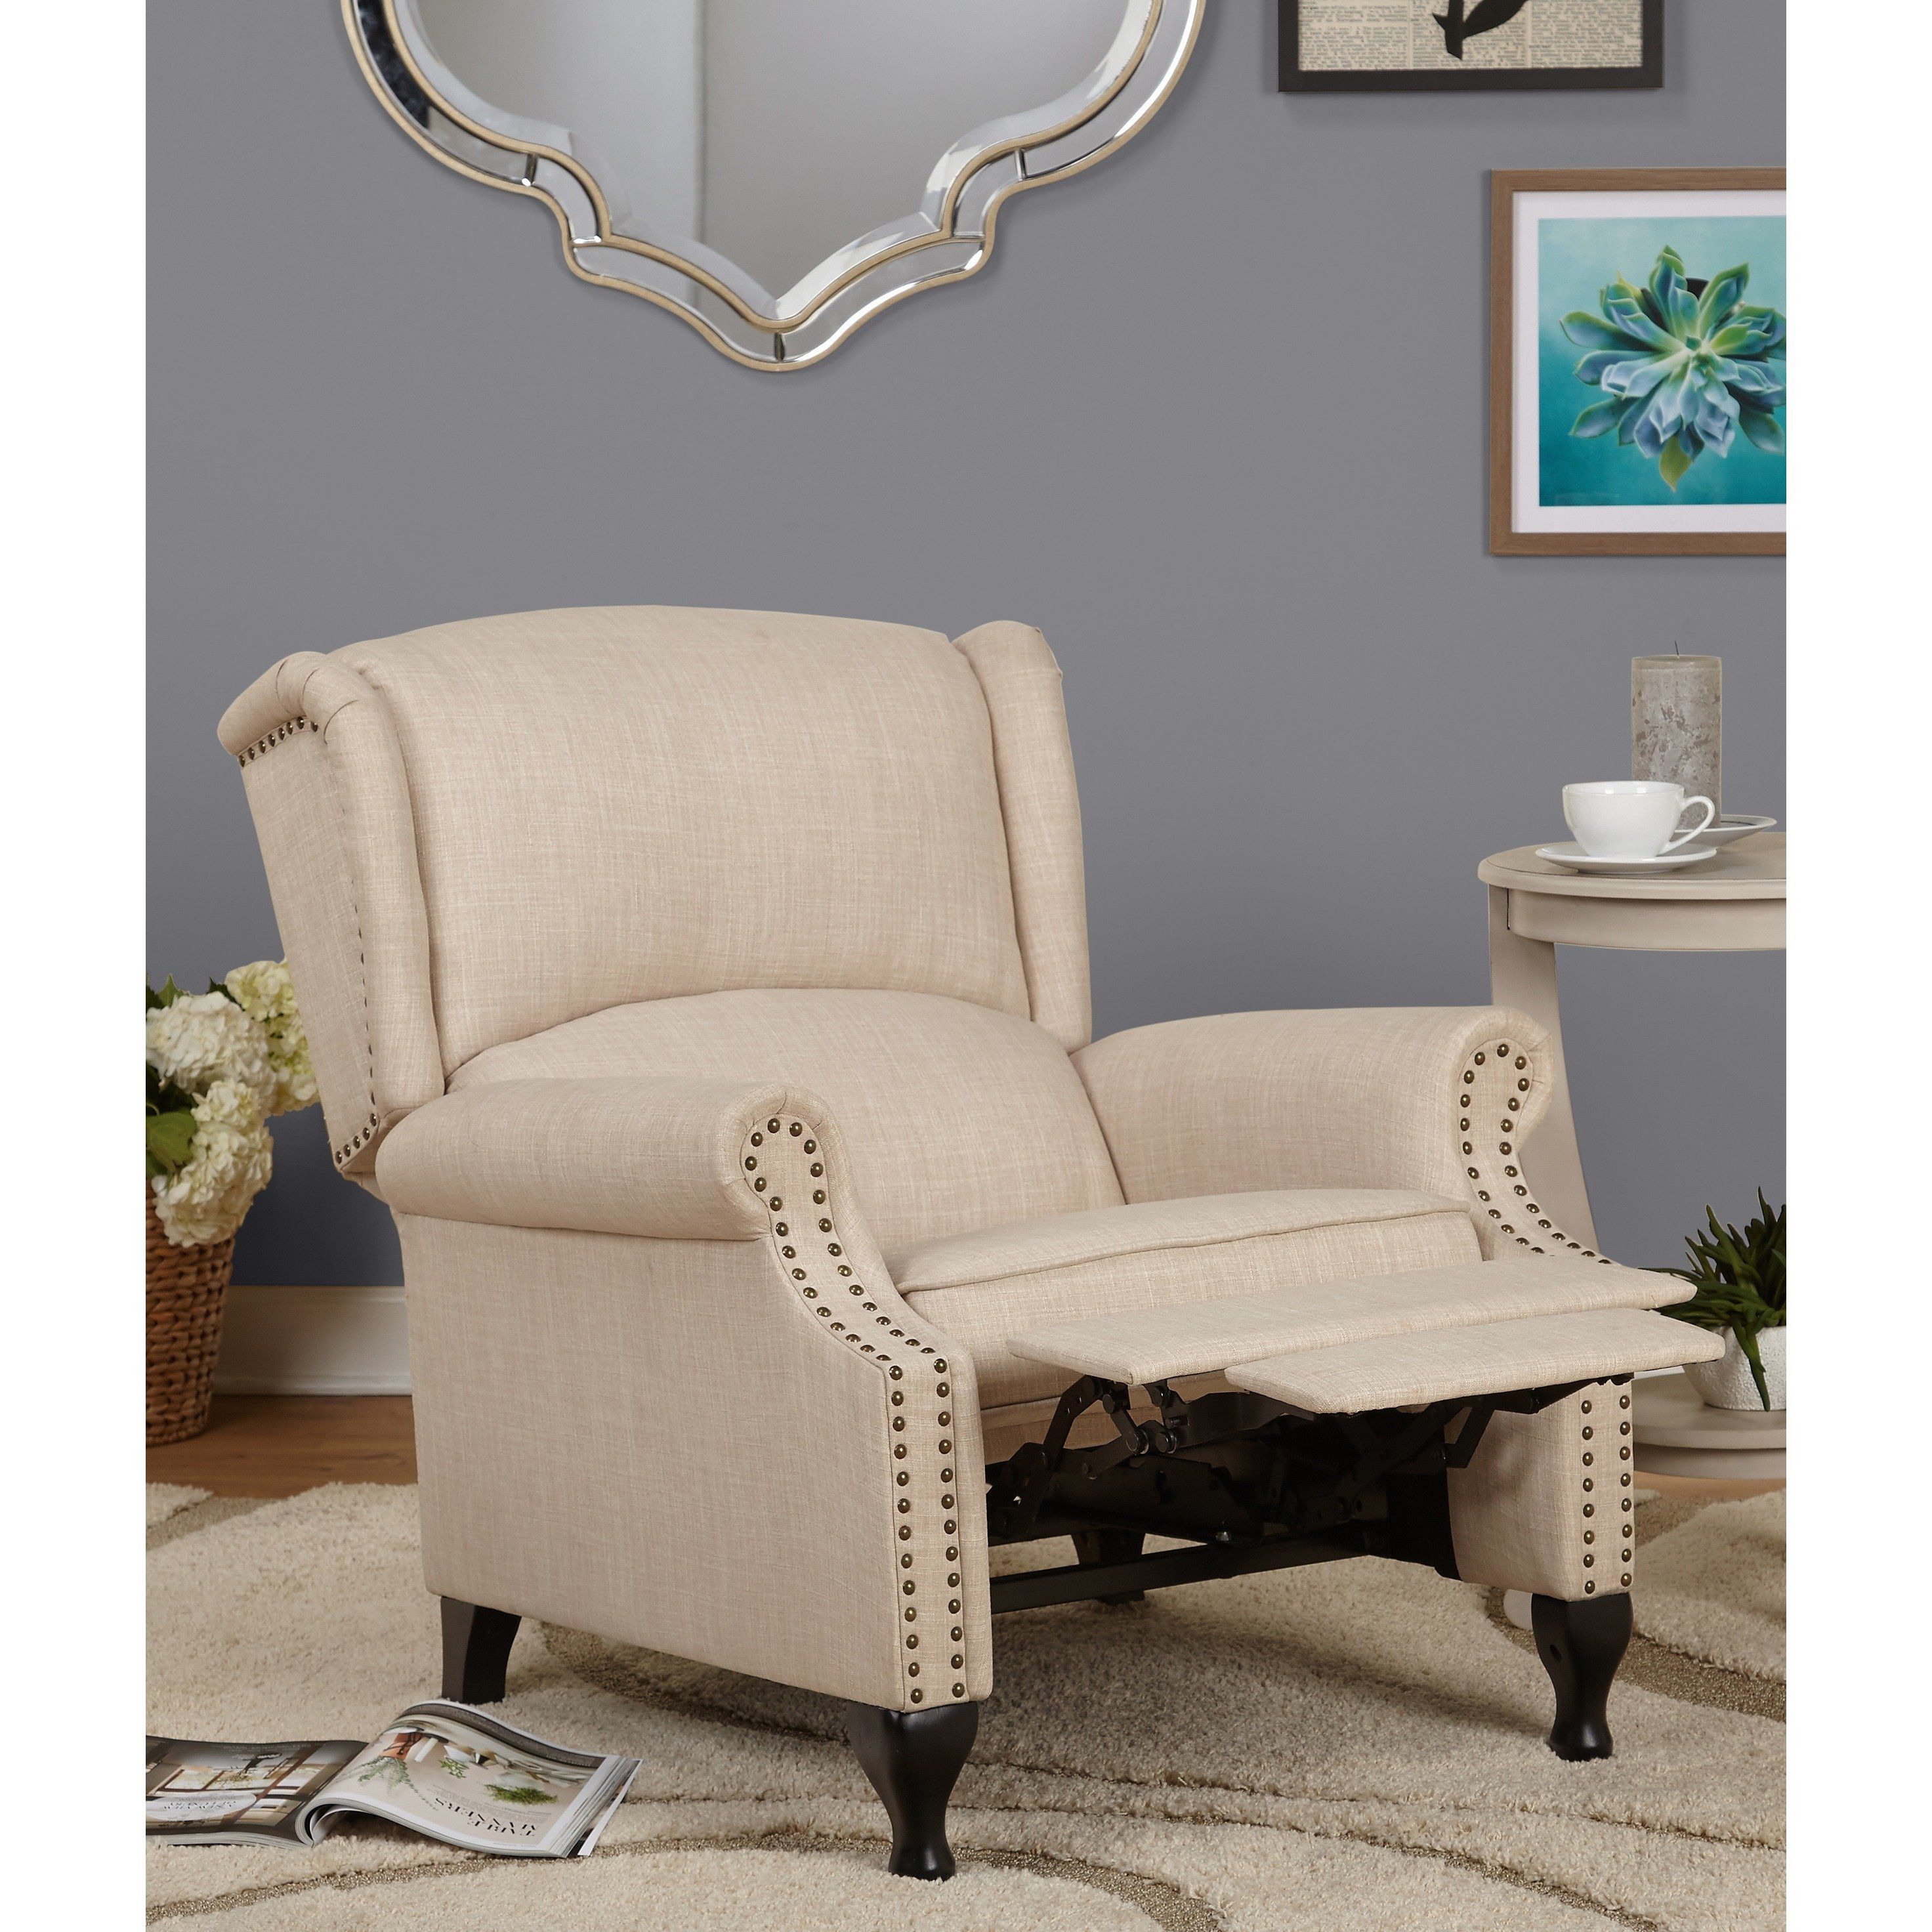 Shop Simple Living Upholstered Wing Recliner – Free Shipping Today With Regard To Franco Iii Fabric Swivel Rocker Recliners (View 17 of 25)